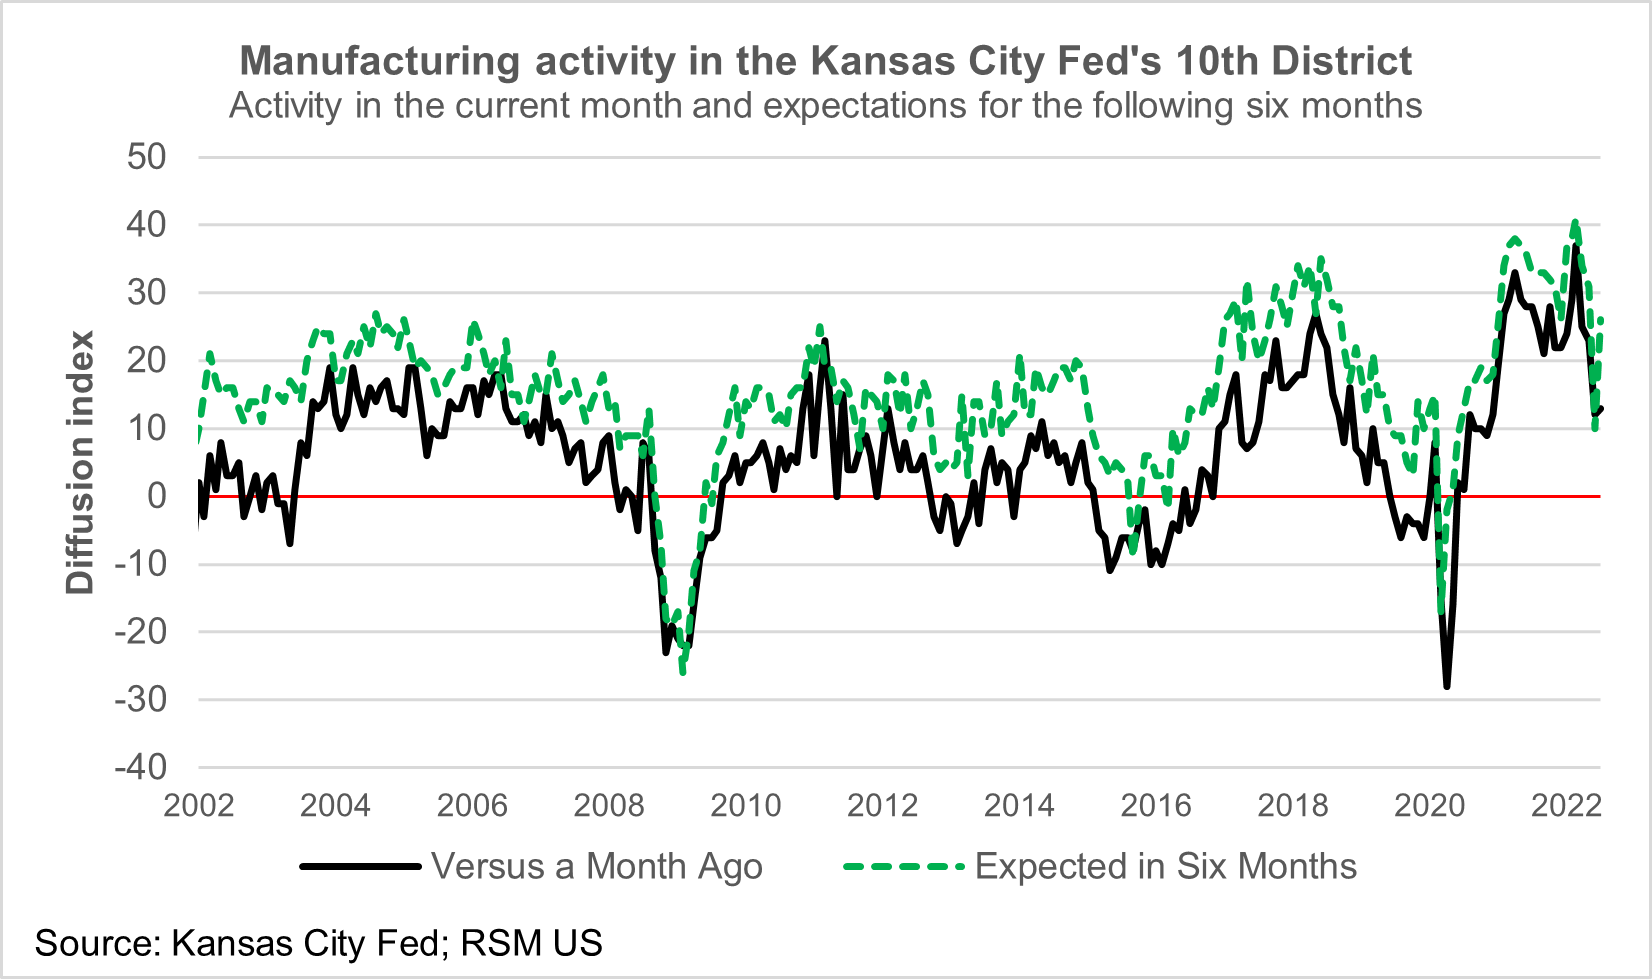 A chart shows manufacturing activity in the Kansas City Fed's 10th District, from 2002 through mid-2022